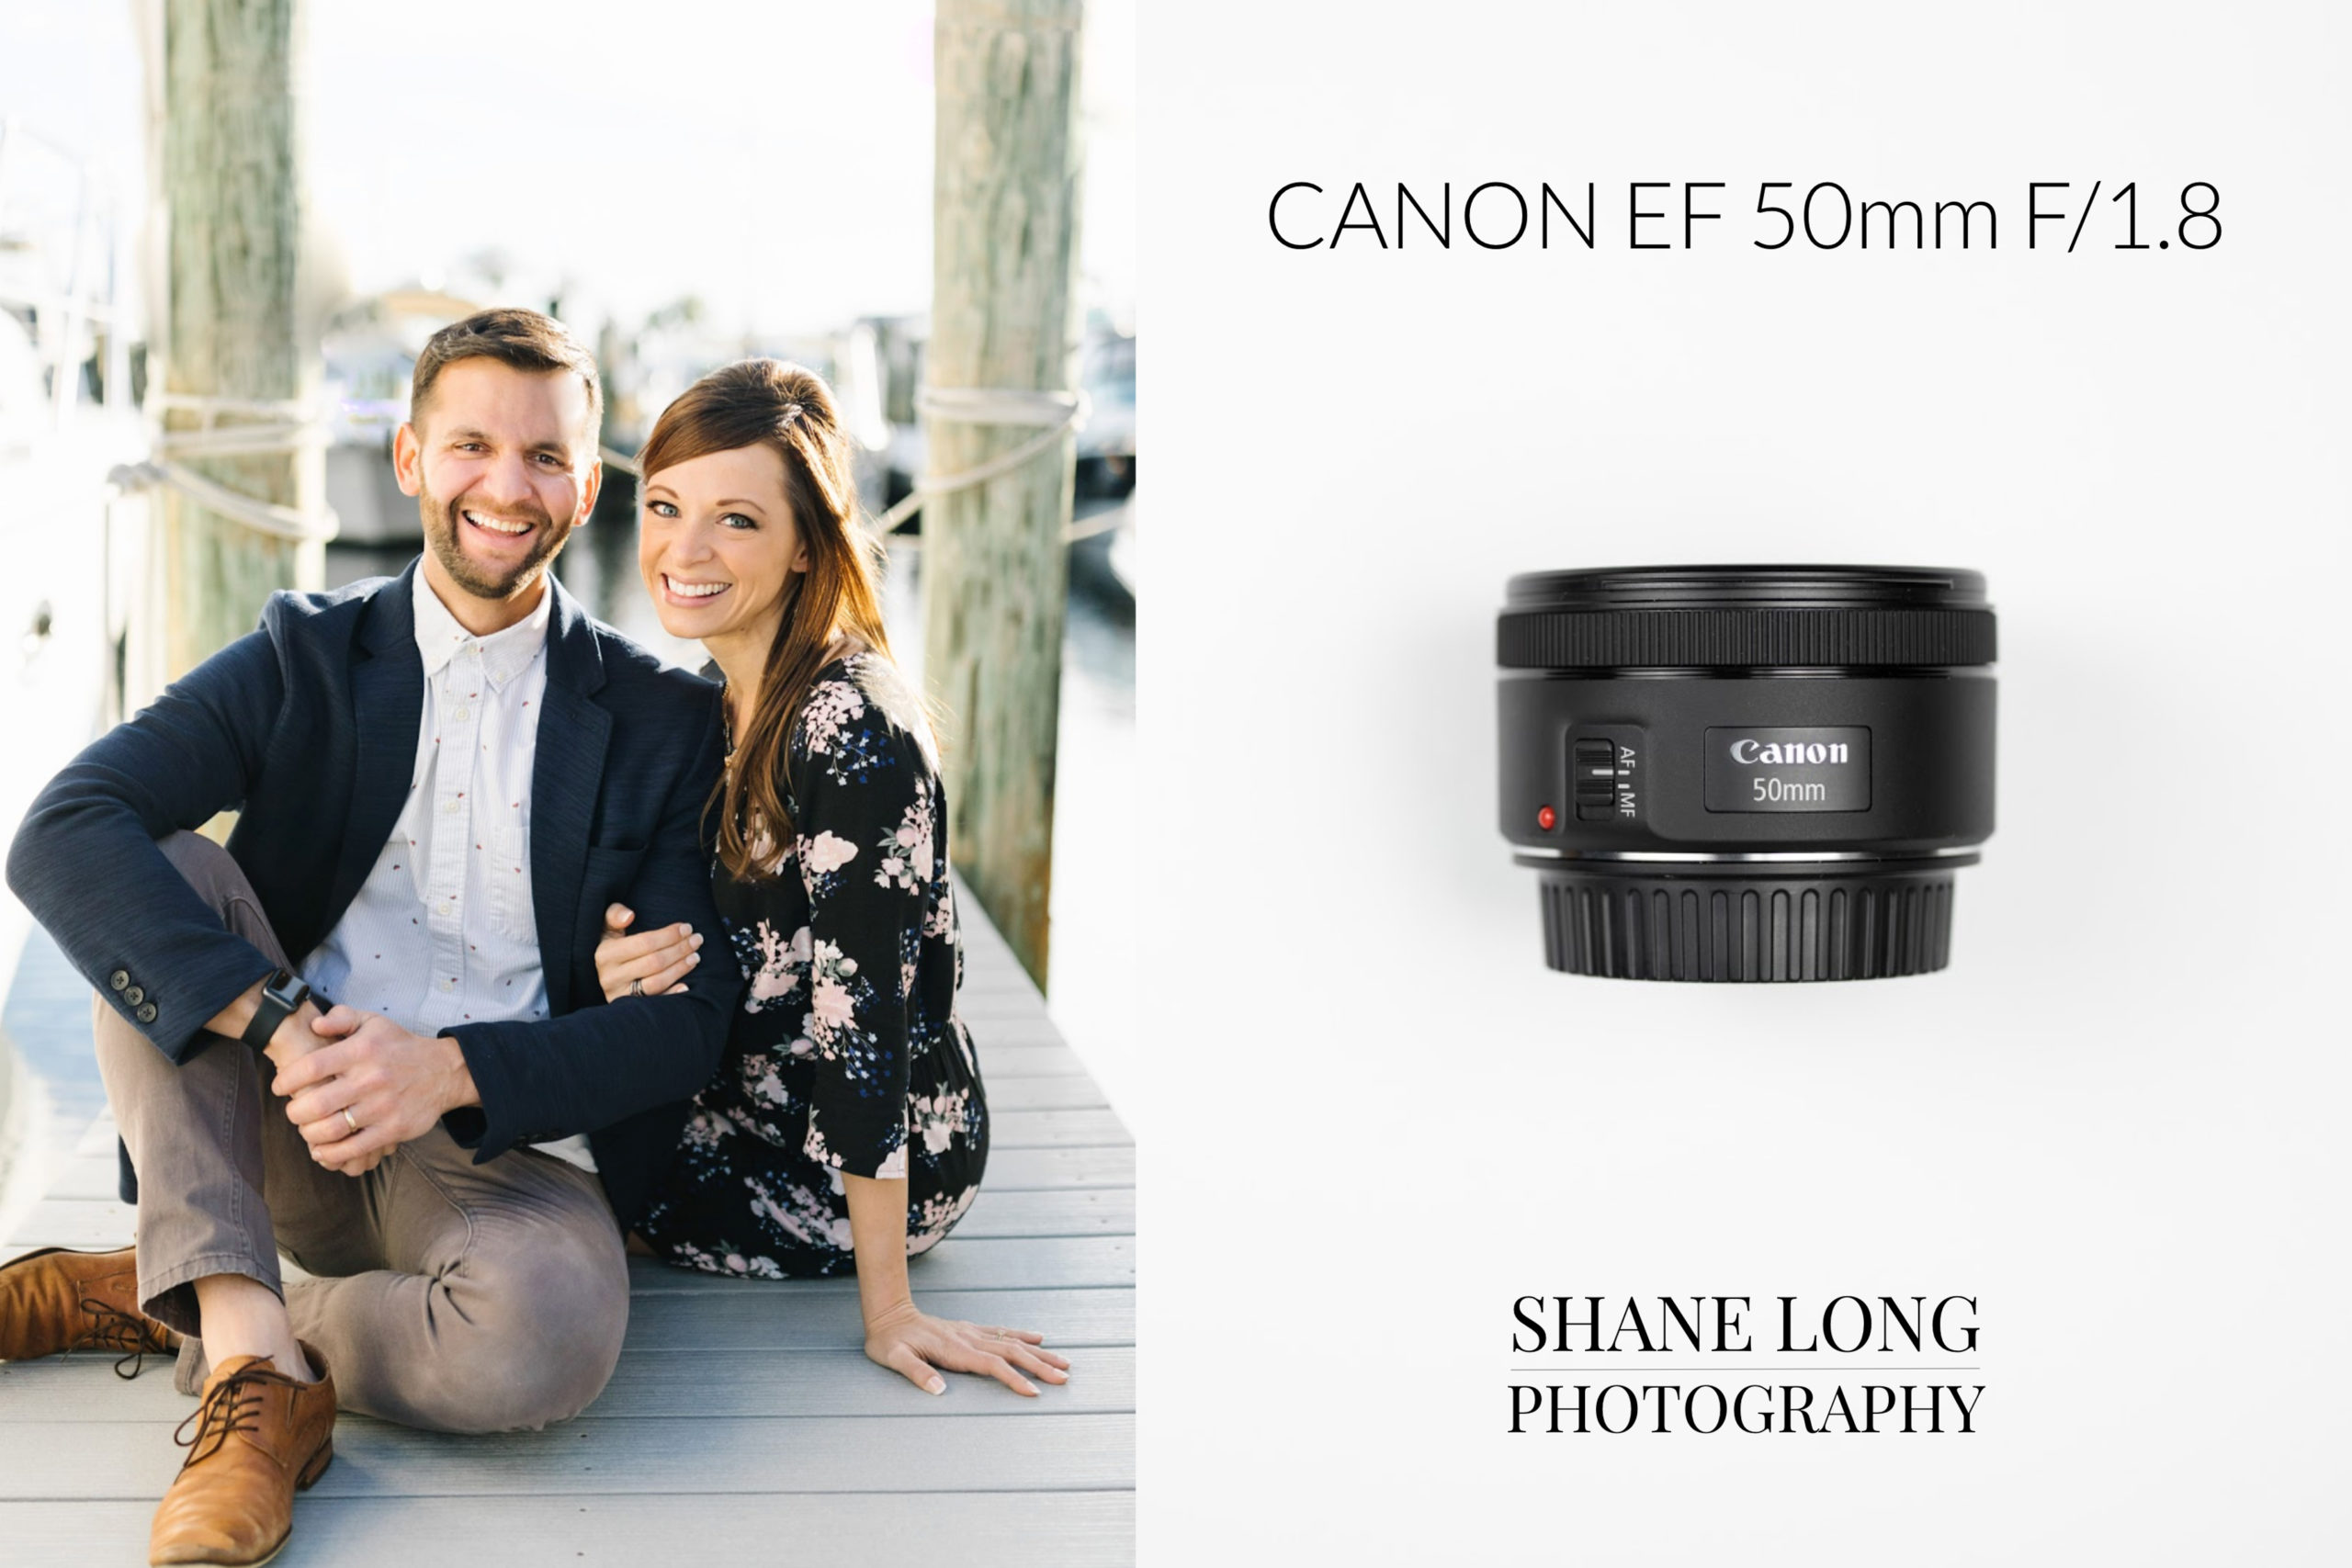 Canon 50mm f/1.8 II for dslr